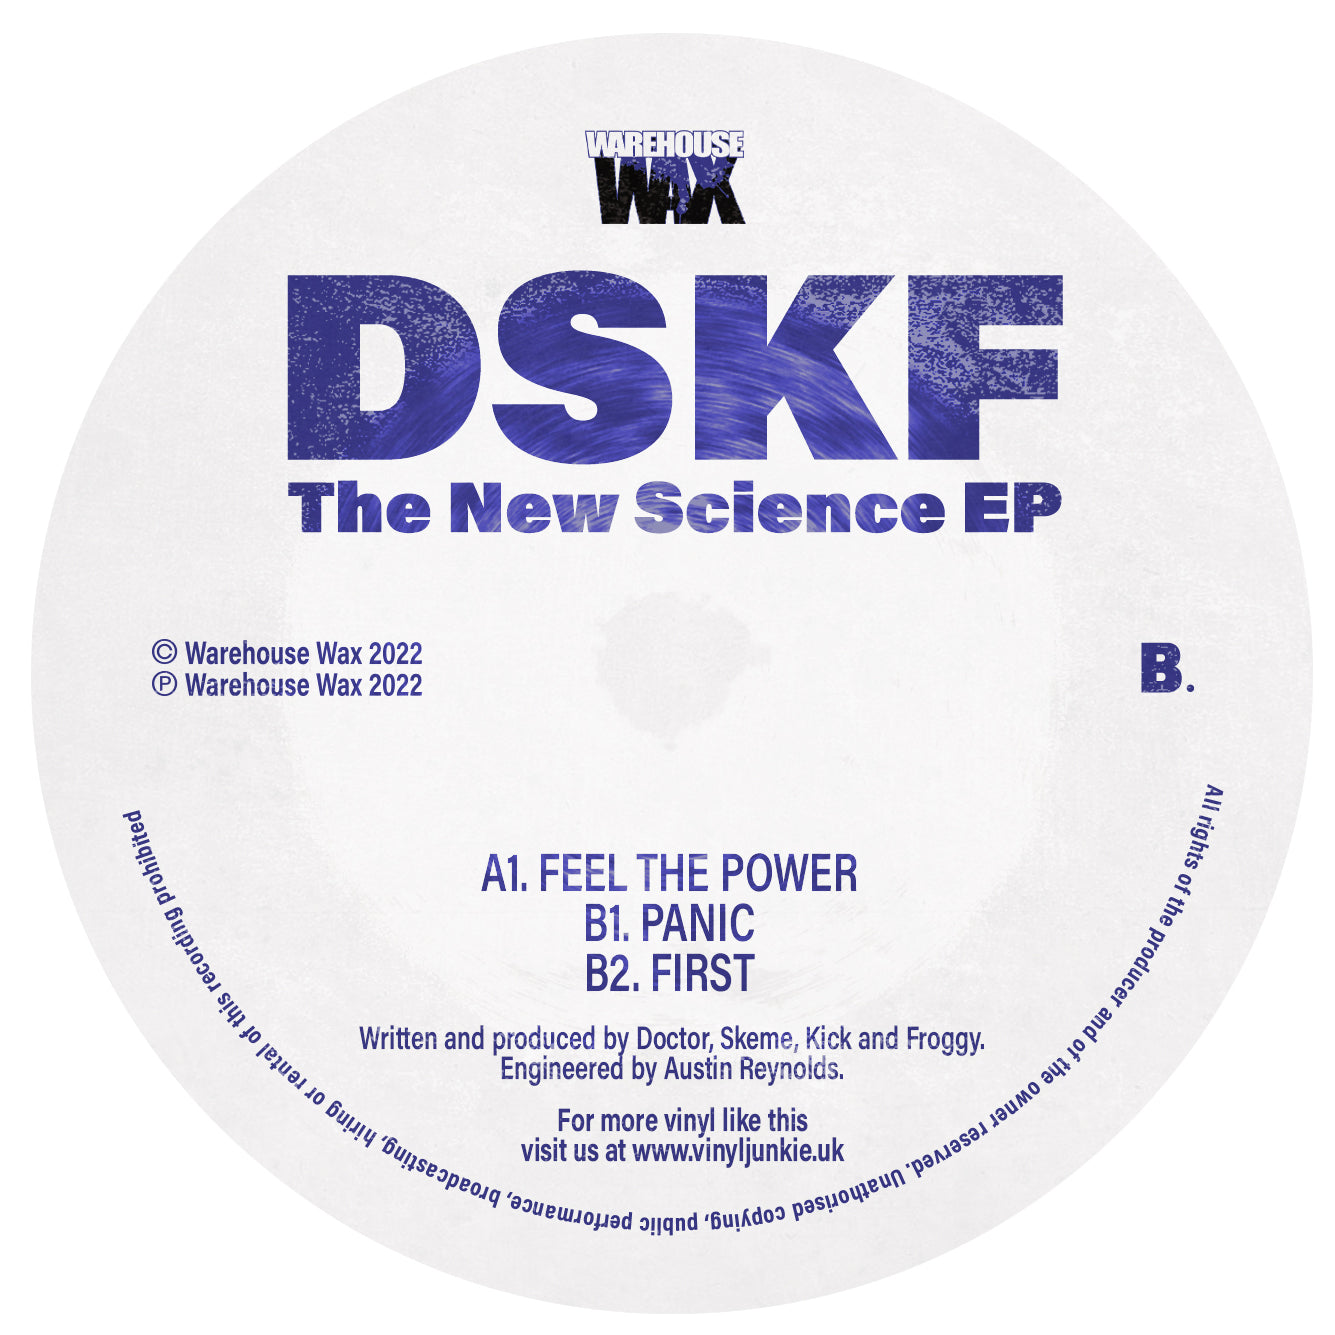 DSKF - The New Science EP